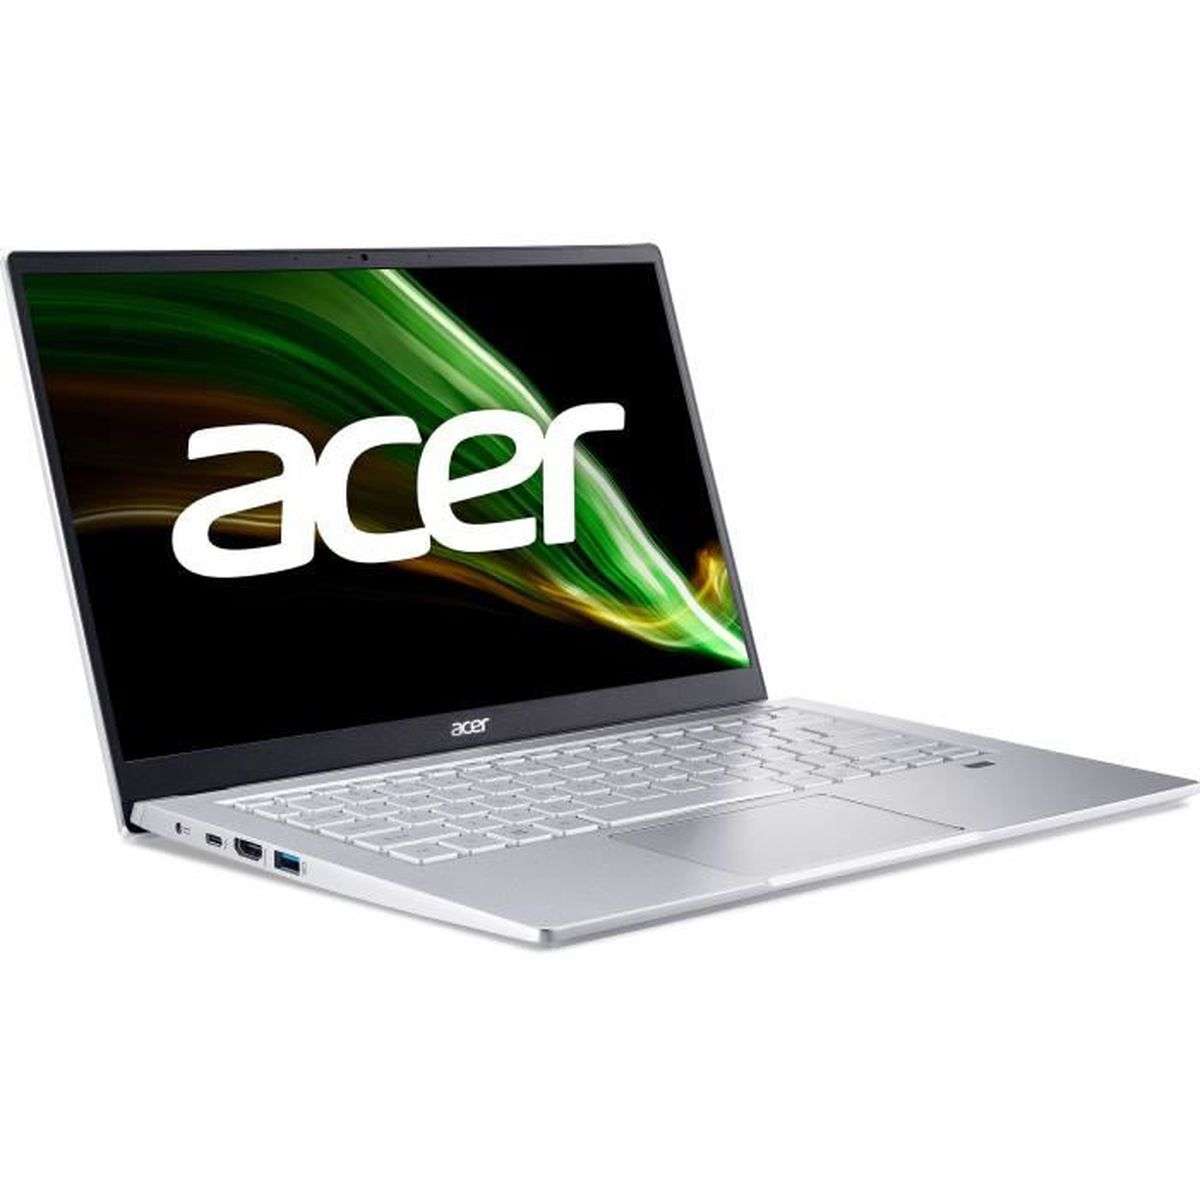 Good deal: Cdiscount breaks the price of the ACER Swift 3 SF314-511 laptop thumbnail